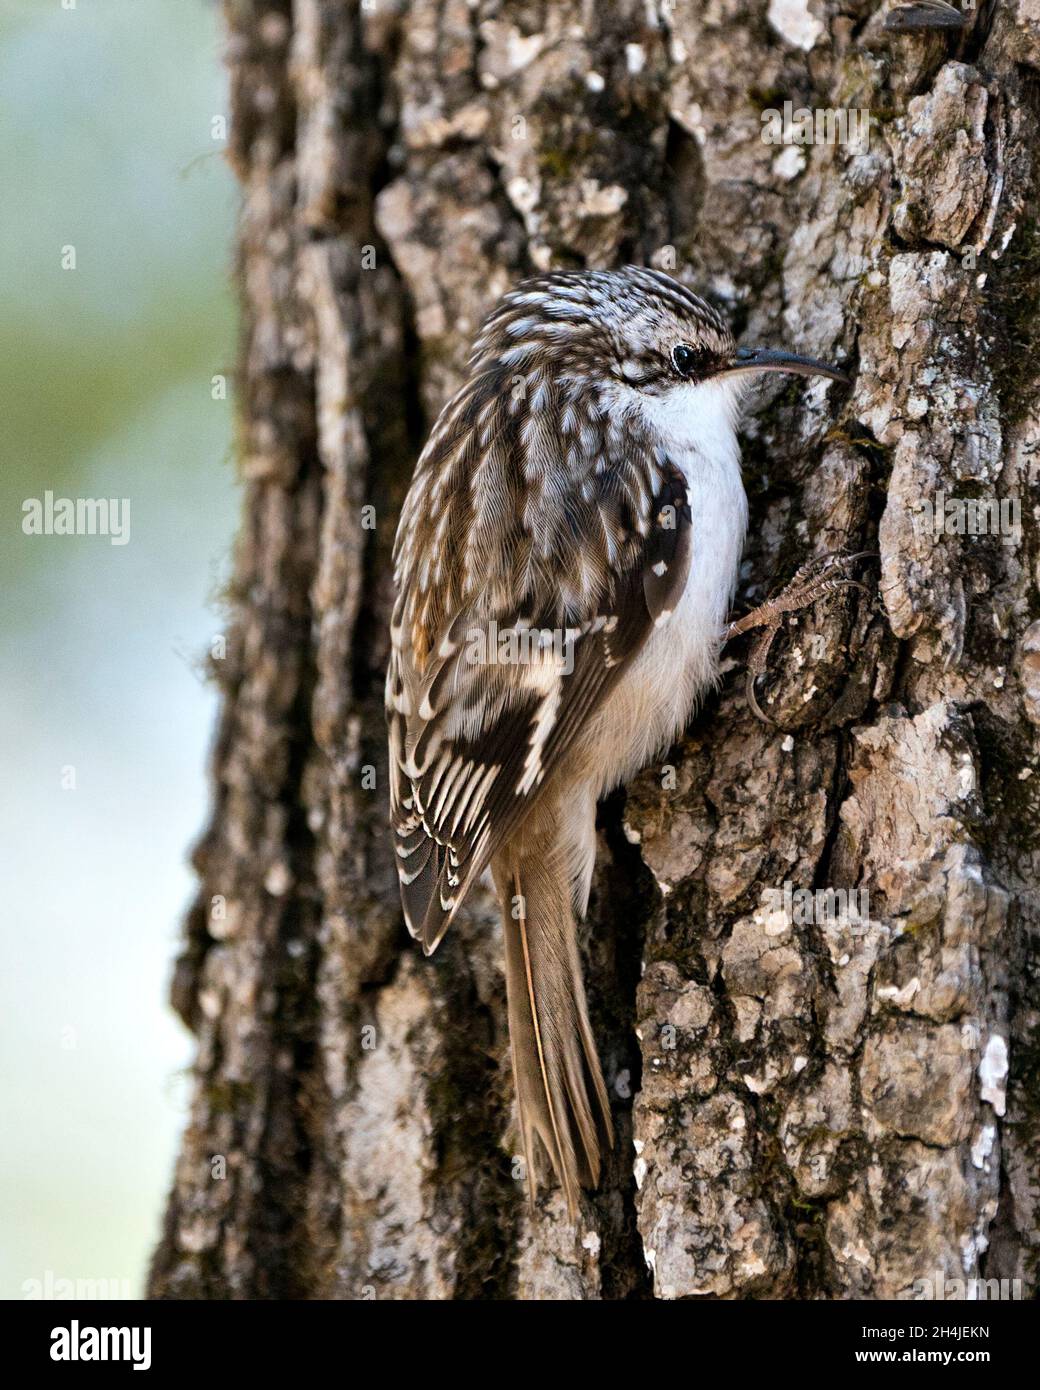 Brown Creeper bird close-up on a tree trunk looking for insect in its environment and habitat and displaying camouflage brown feathers, curved claws. Stock Photo